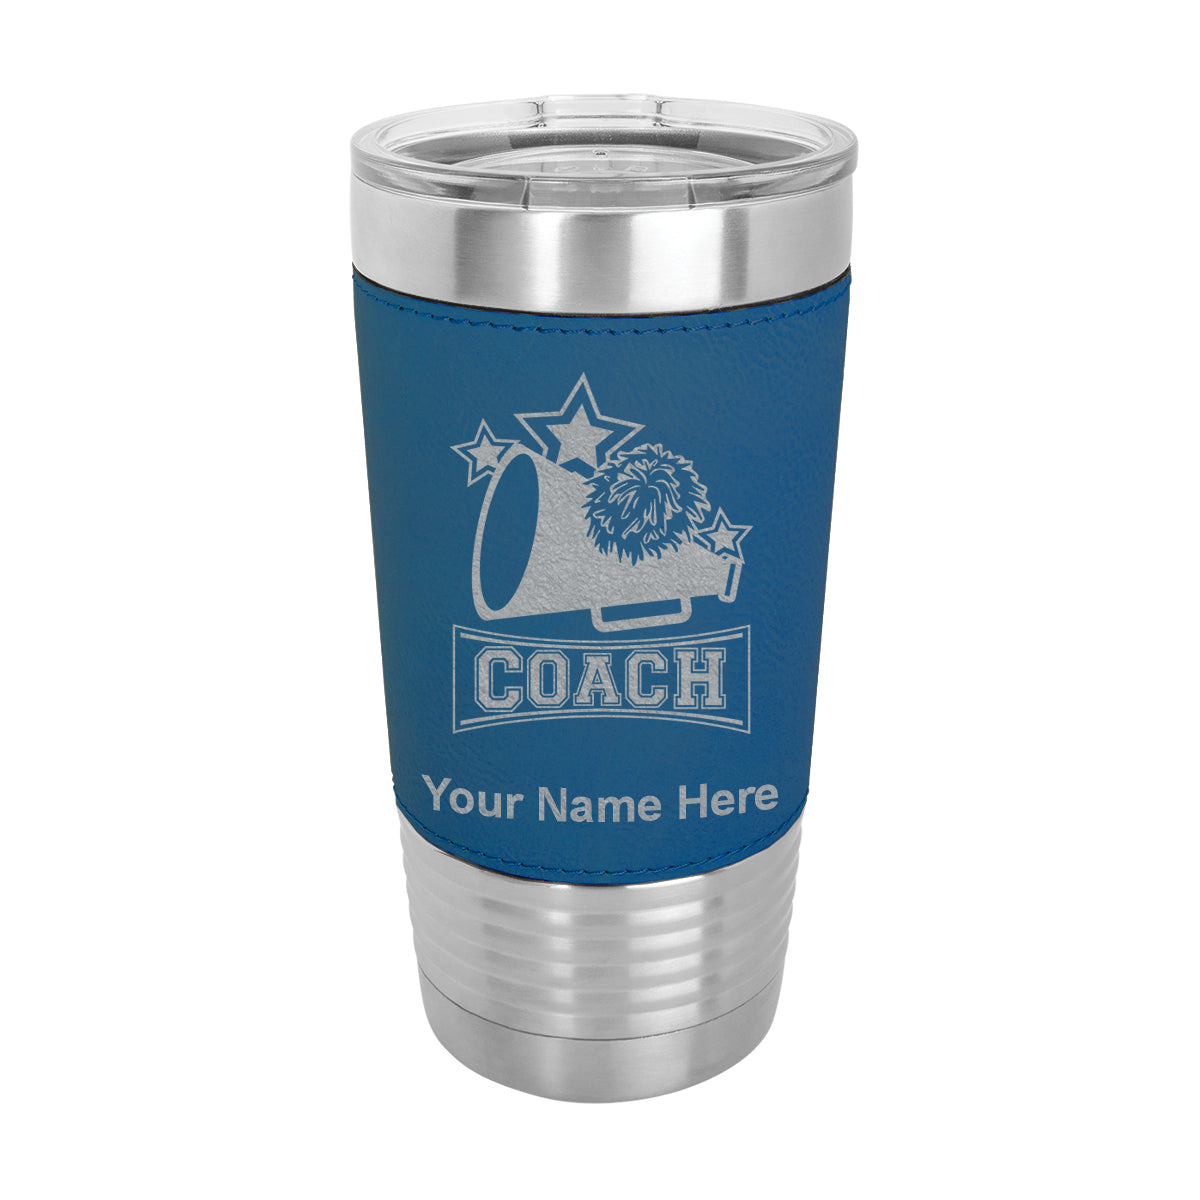 20oz Faux Leather Tumbler Mug, Cheerleading Coach, Personalized Engraving Included - LaserGram Custom Engraved Gifts